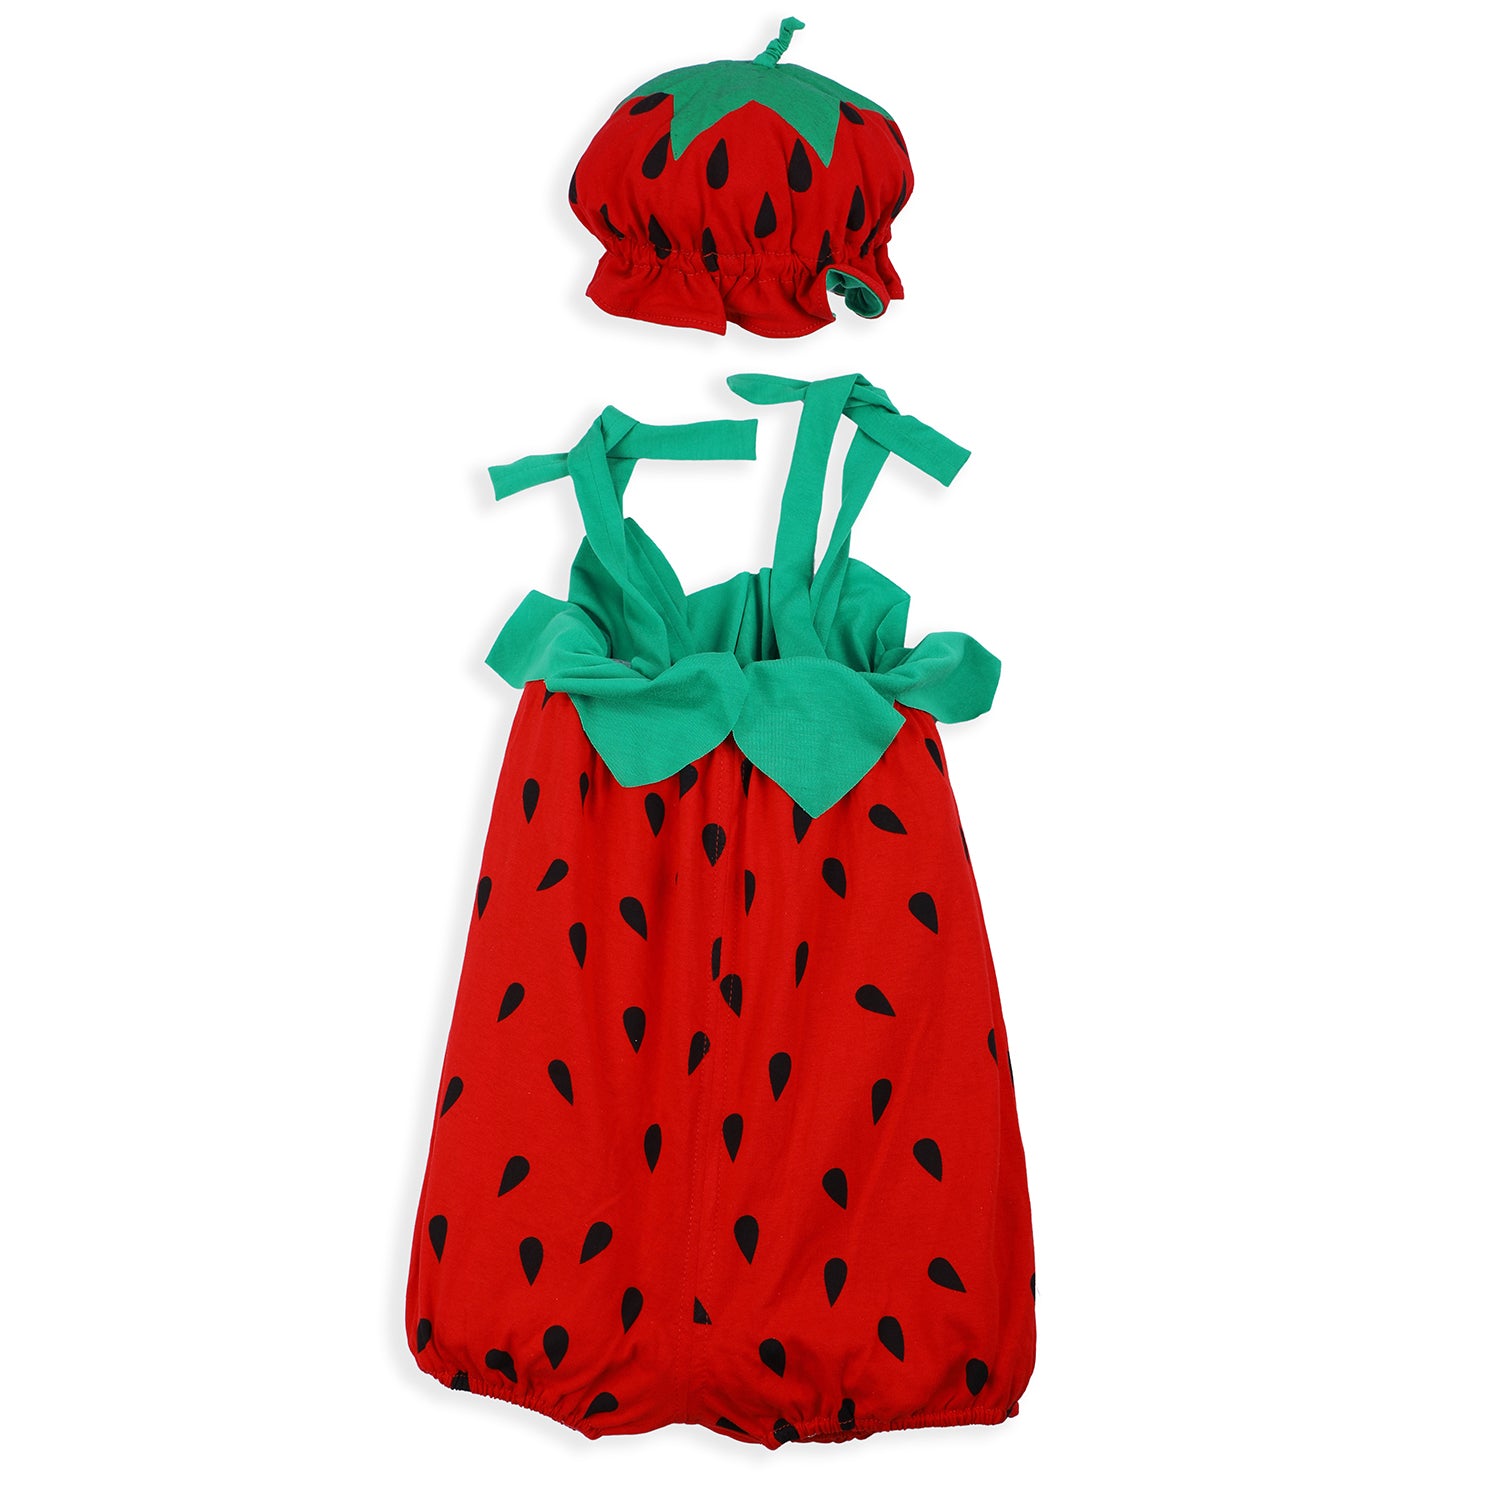 Baby Moo Stylish Strawberry Costume 2pcs Cap And Fancy Dress - Red - Baby Moo